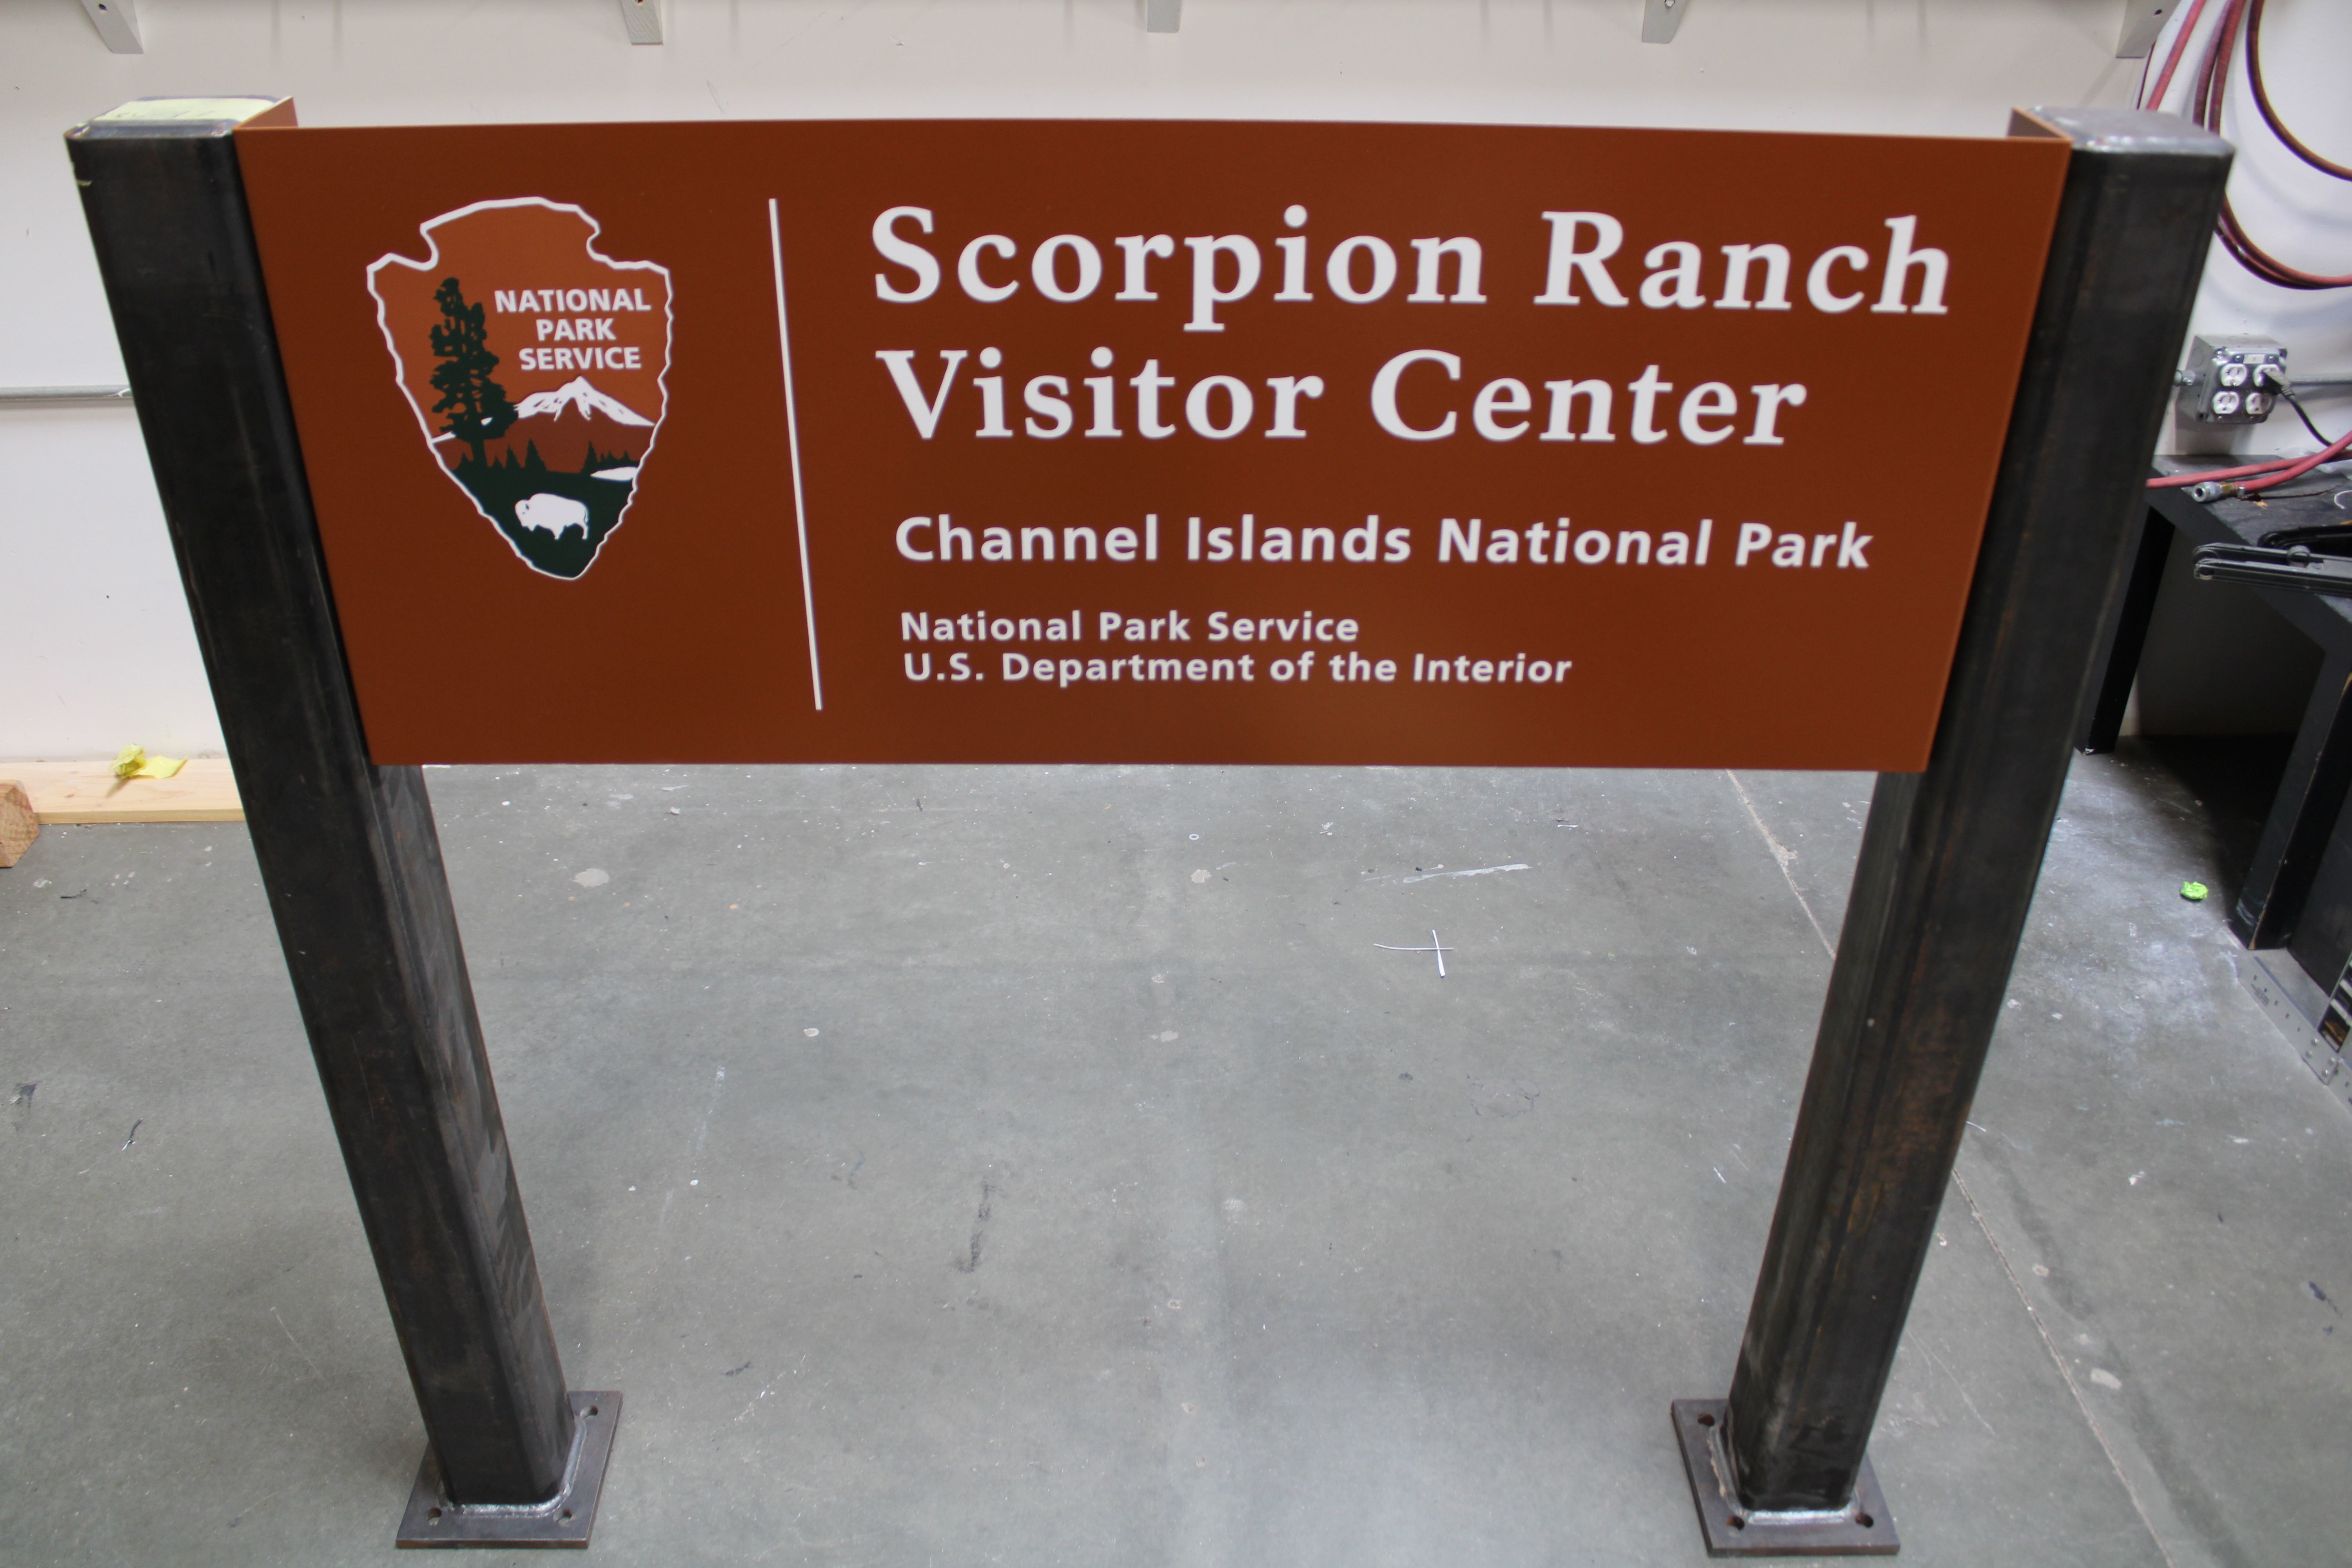 M8030- Large Single-faced Aluminum  Sign  with Corten Steel Posts for  Channel Islands National Park, Scorpion Ranch Visitor Center